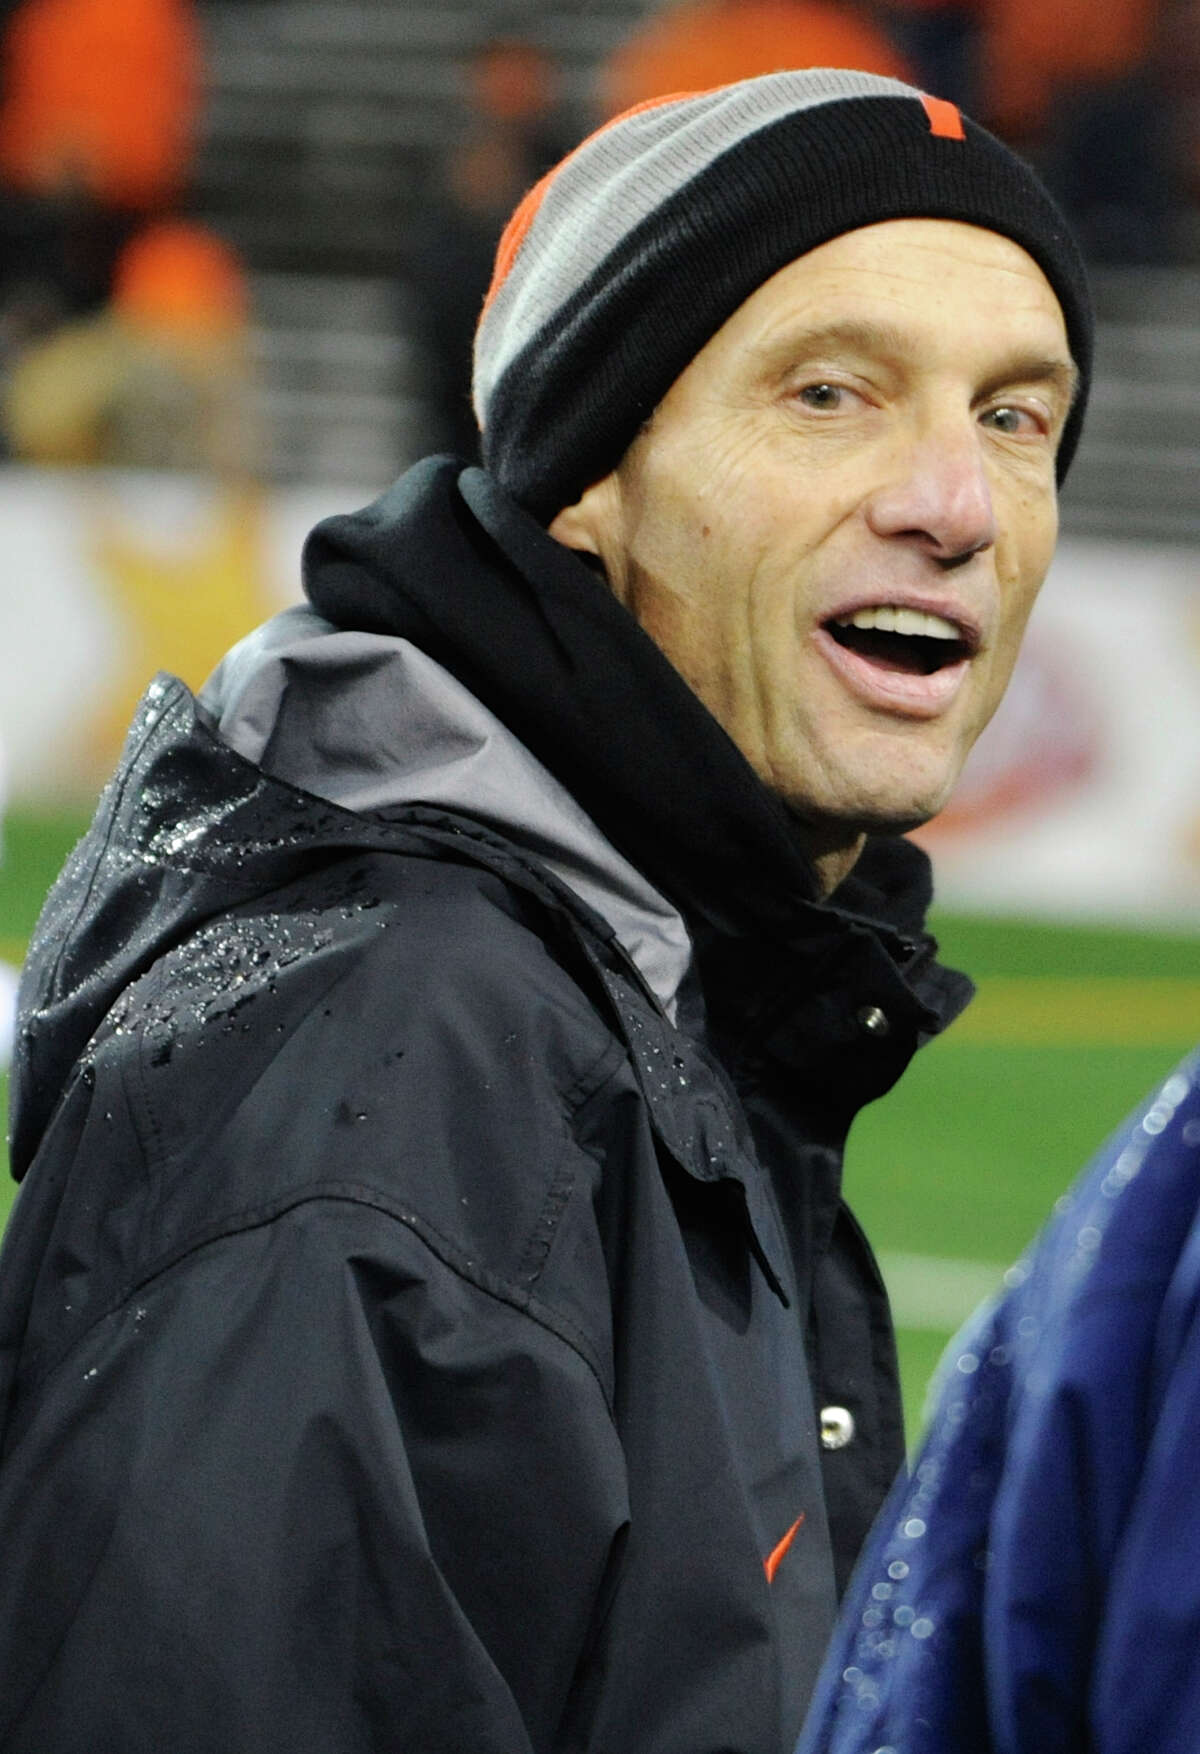 Oregon State coach Mike Riley. Oregon State (8-2, 6-2 Pac-12) is coming off a victory over Cal. Oregon State plays rival Oregon on Saturday.